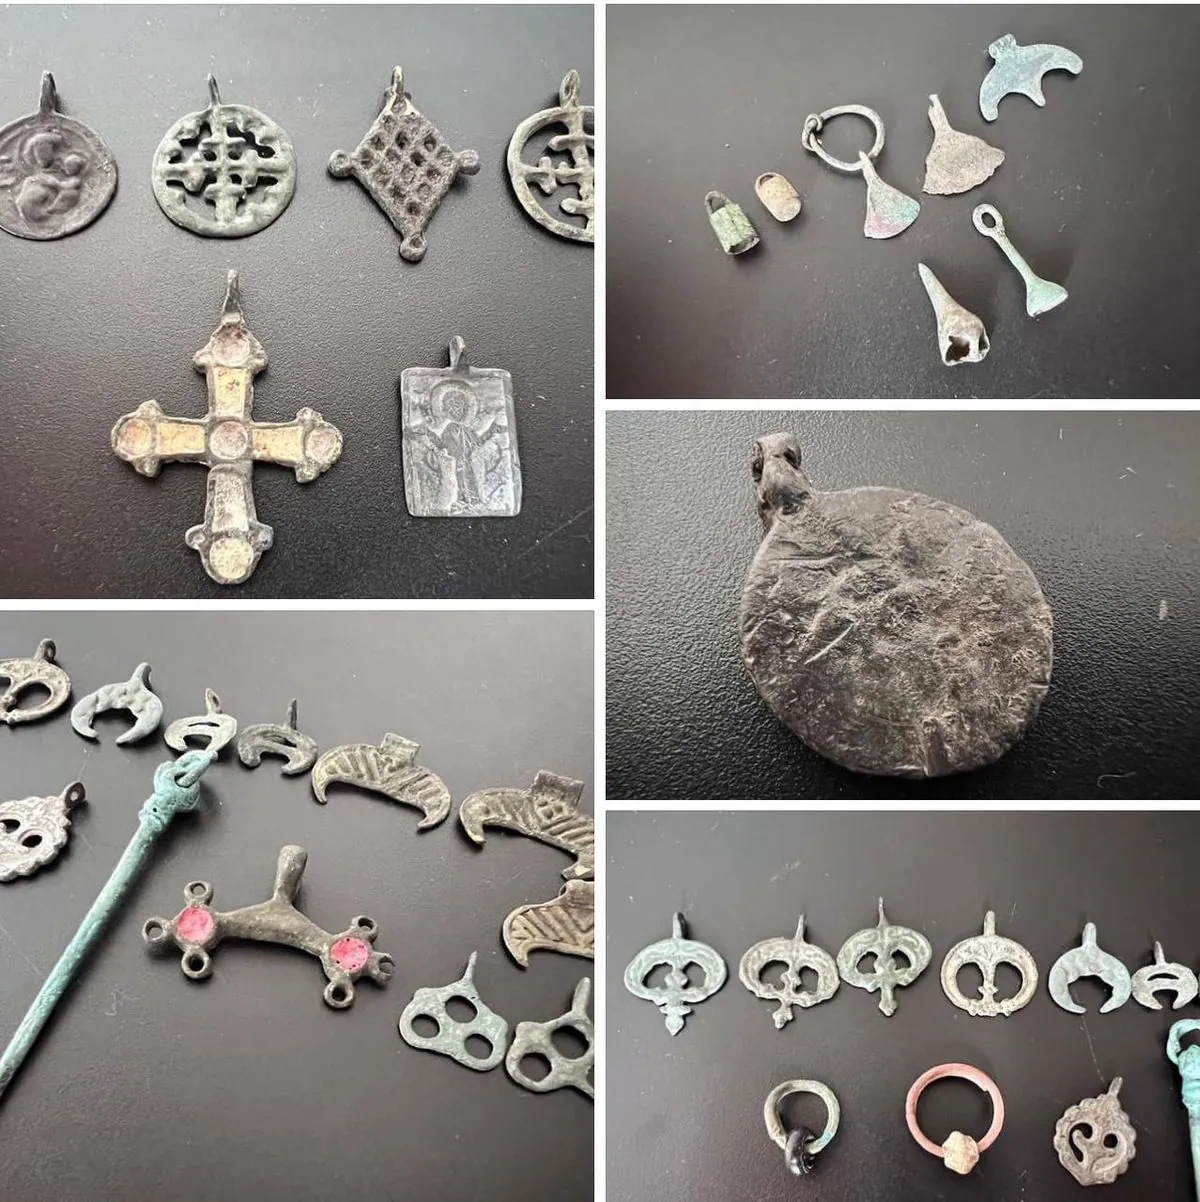 Customs officers stopped the illegal shipment of a batch of 75 antiques to the United States